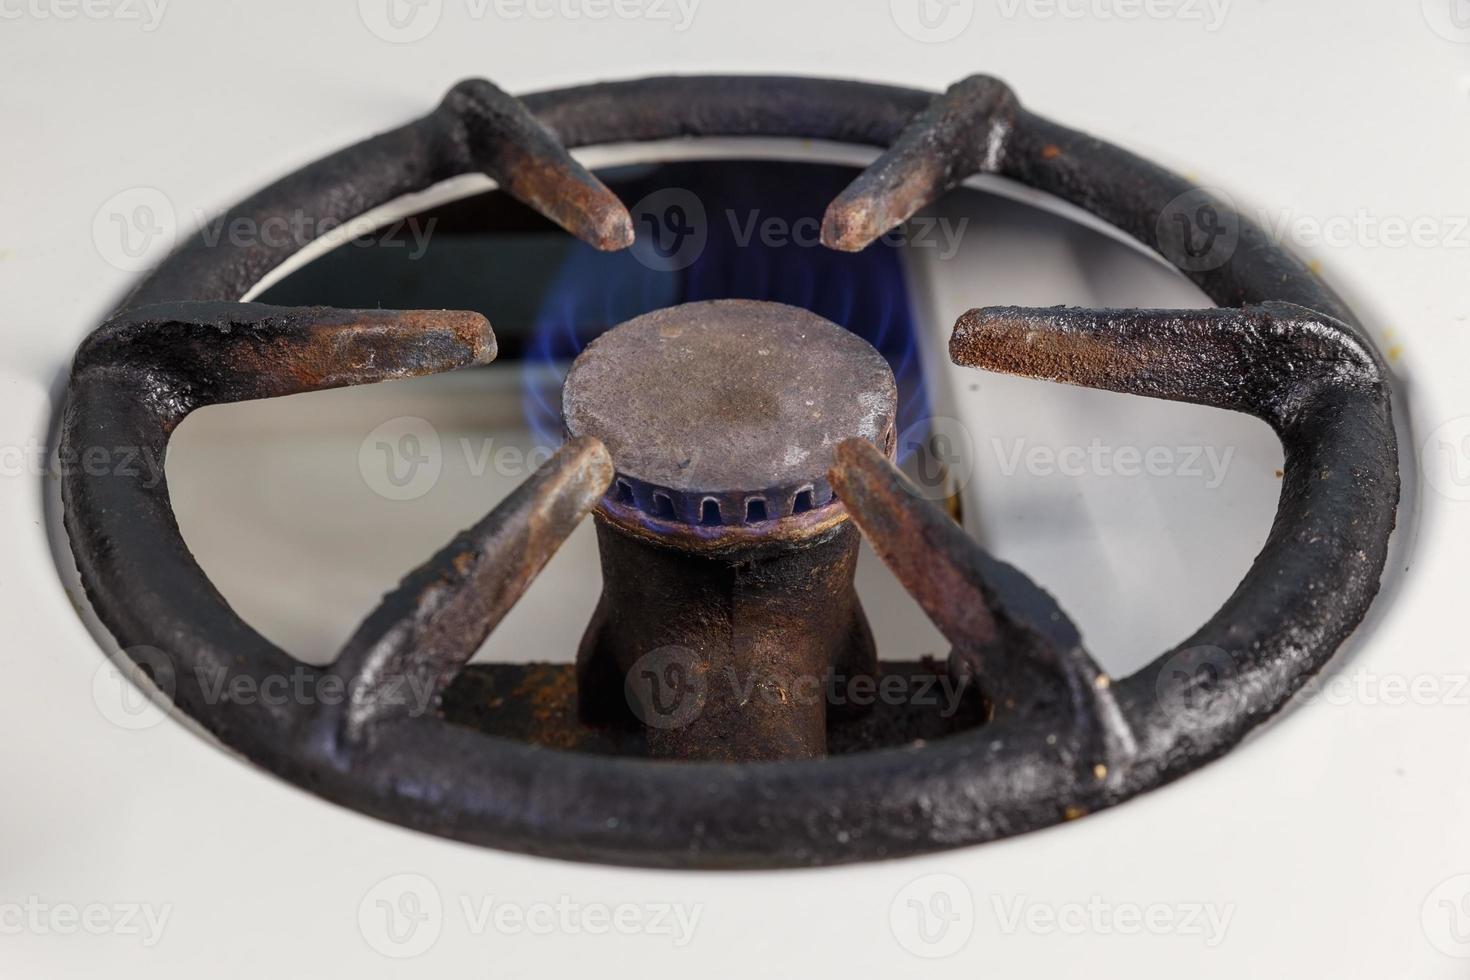 The gas burner on the stove is on and burns with a blue flame. Vintage gas burner. photo